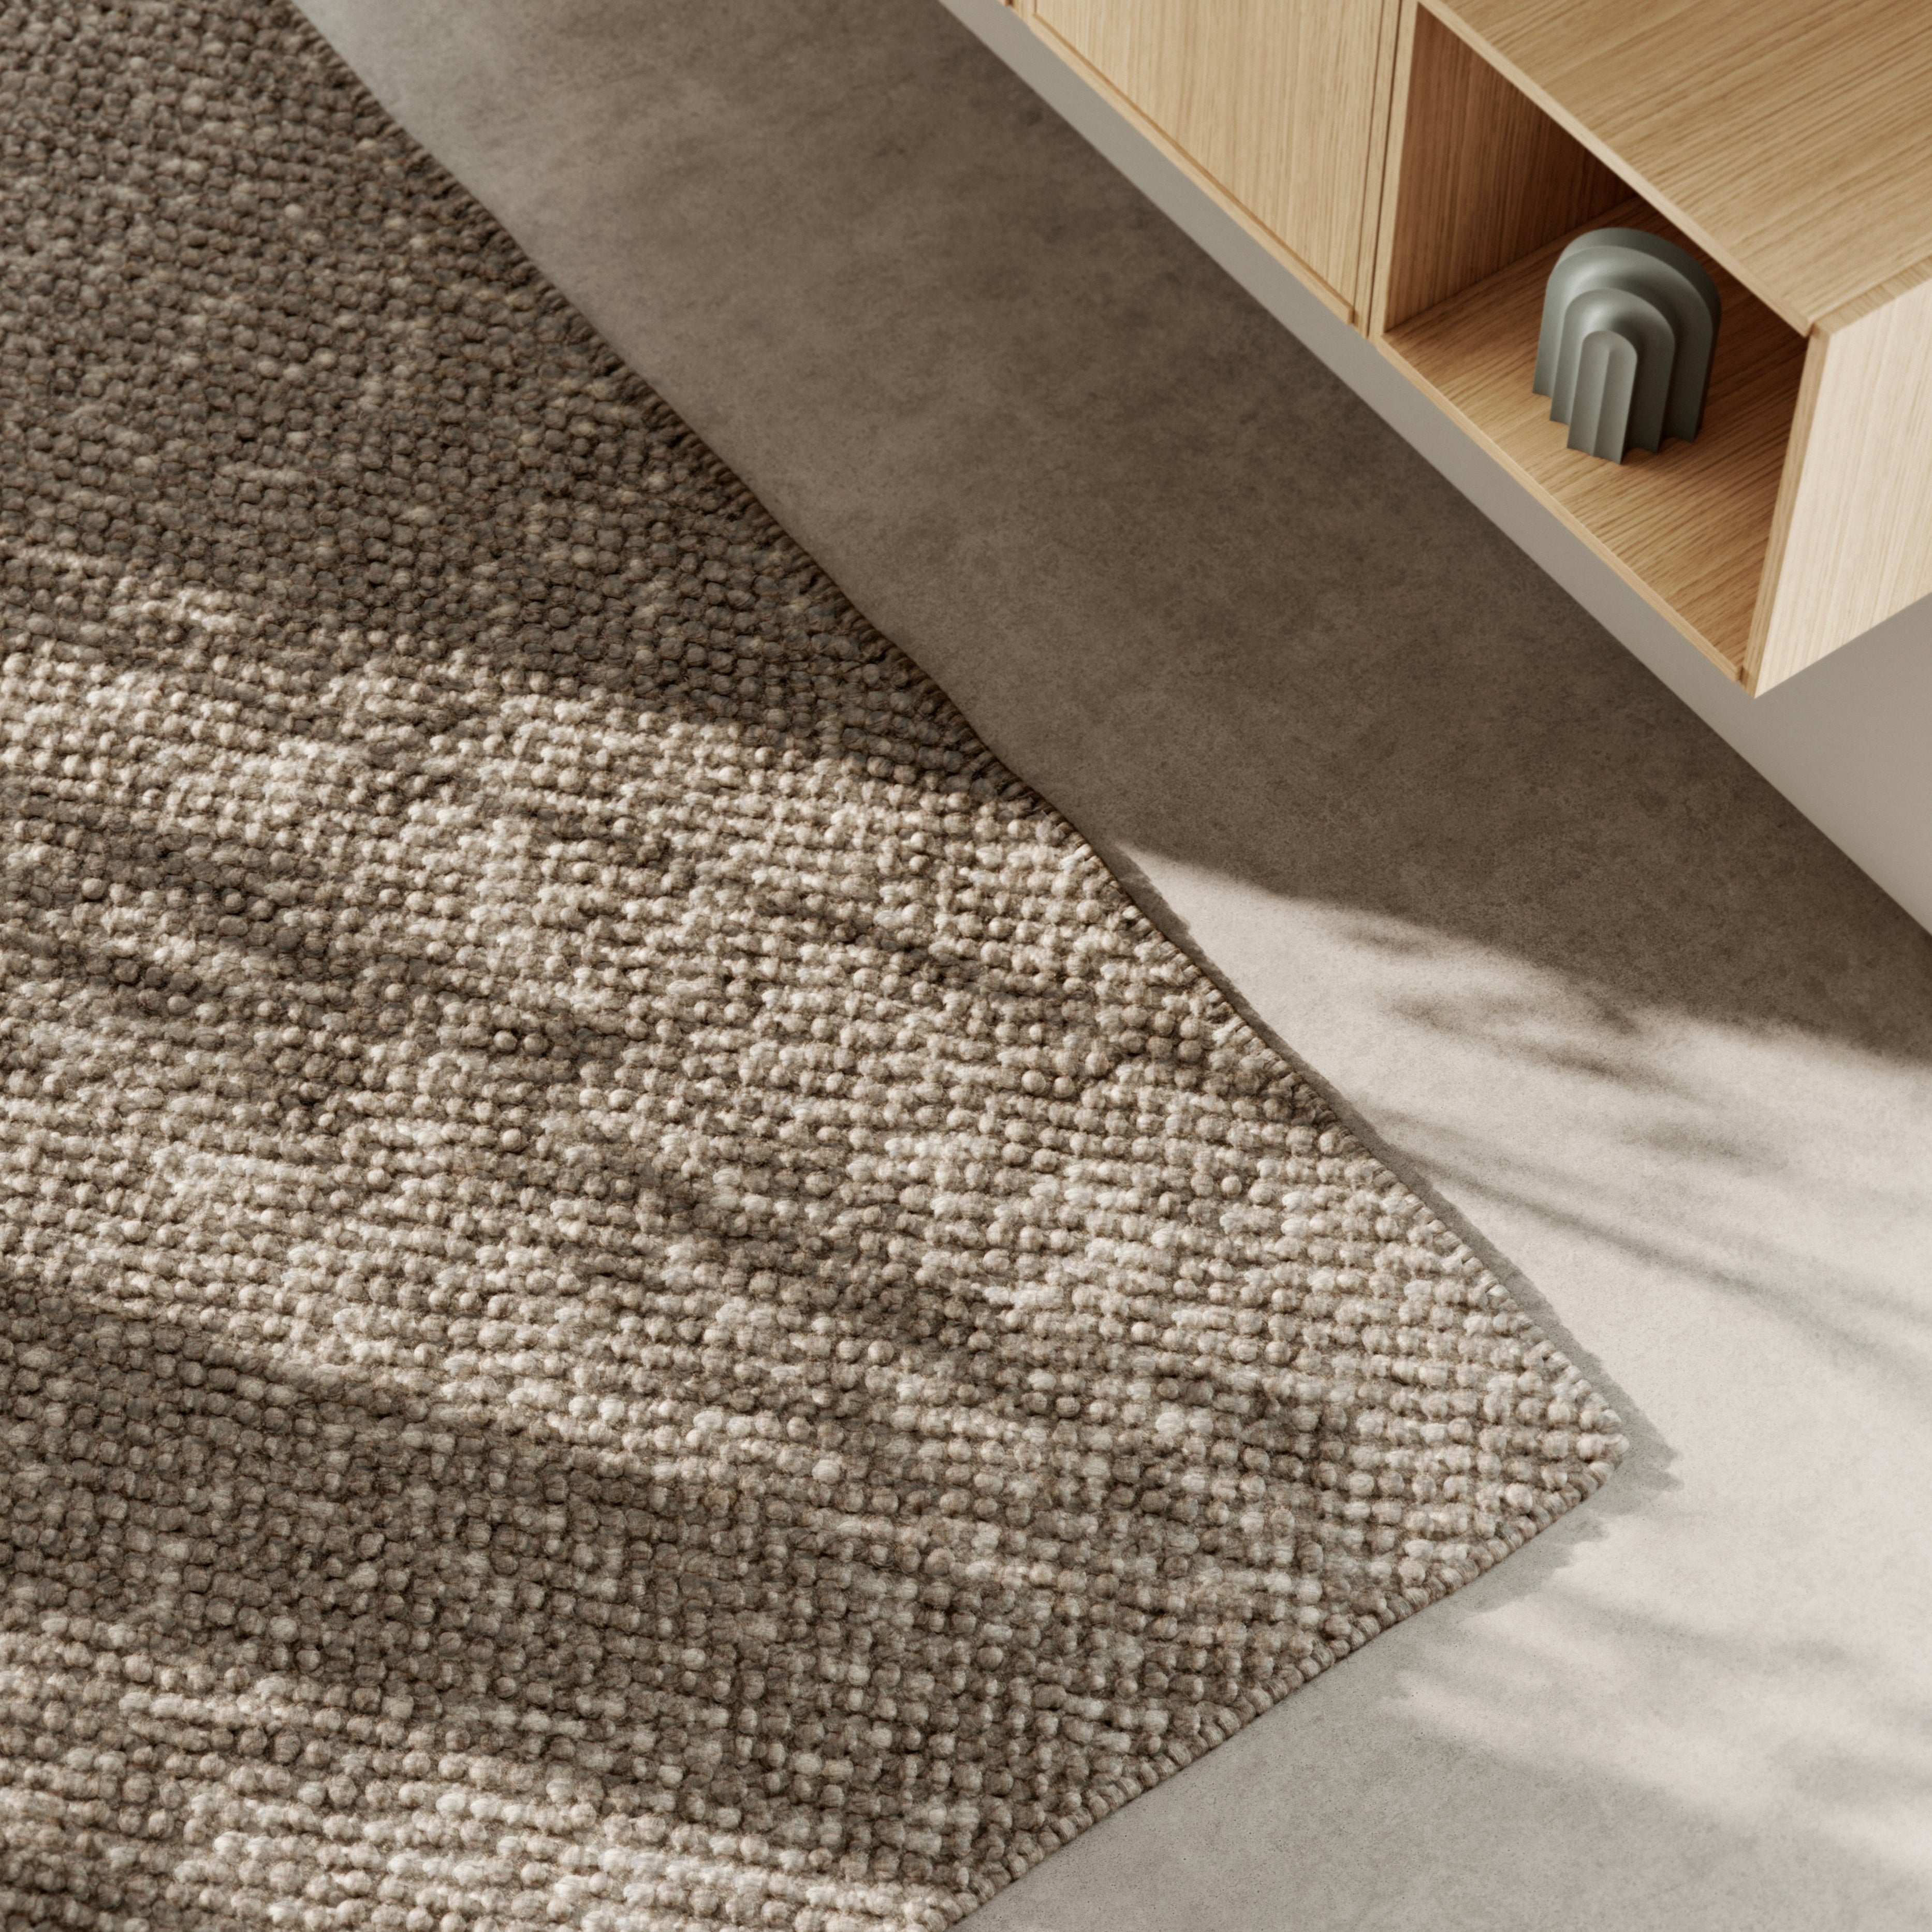 tact rug 200 x 300 cm brown by woud at adorn.house